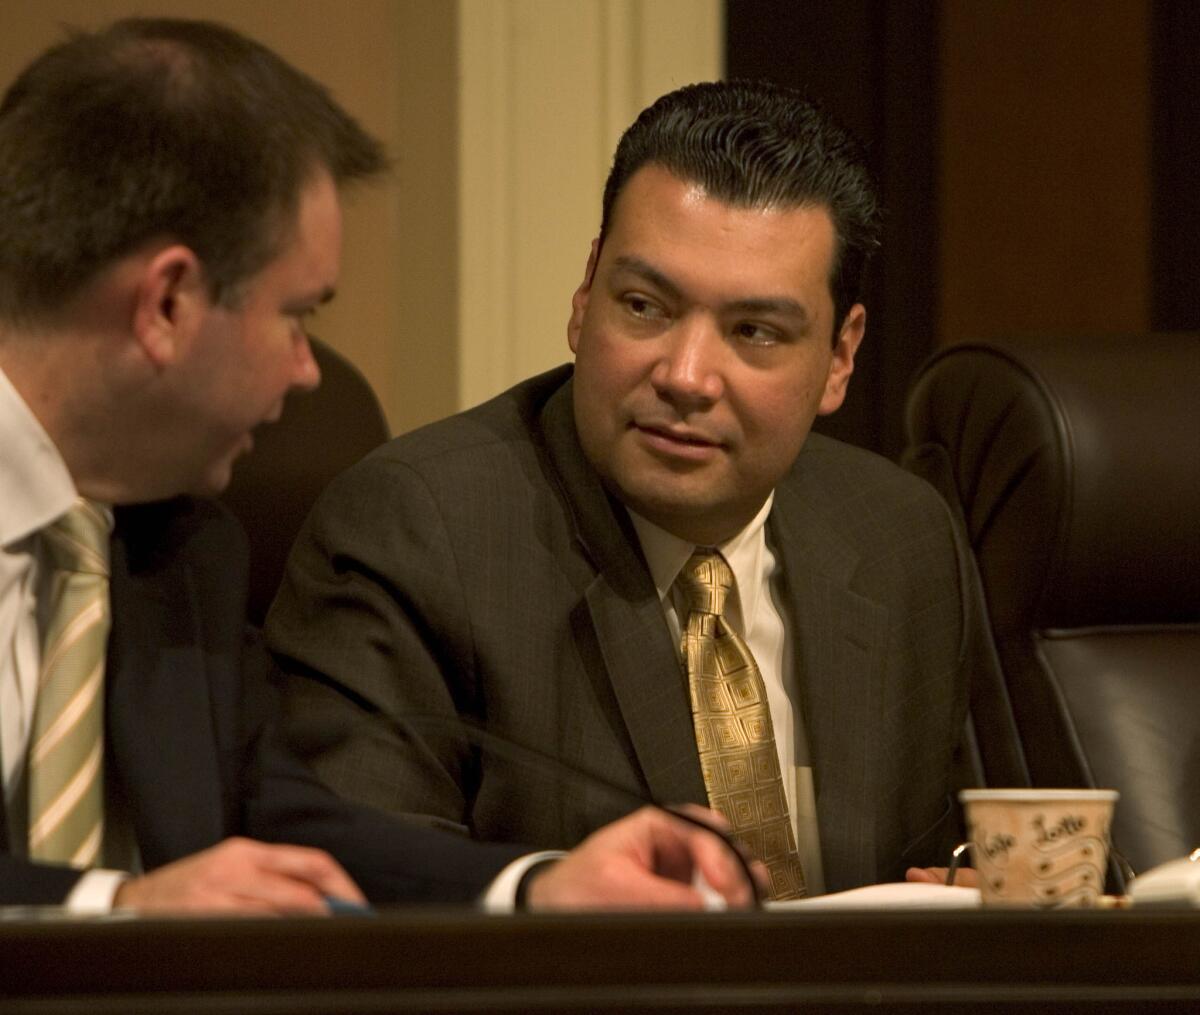 State Senator Alex Padilla (D-Pacoima), center, won Senate approval Wednesday of his bill expanding possible legal challenges to local government districts used for elections.